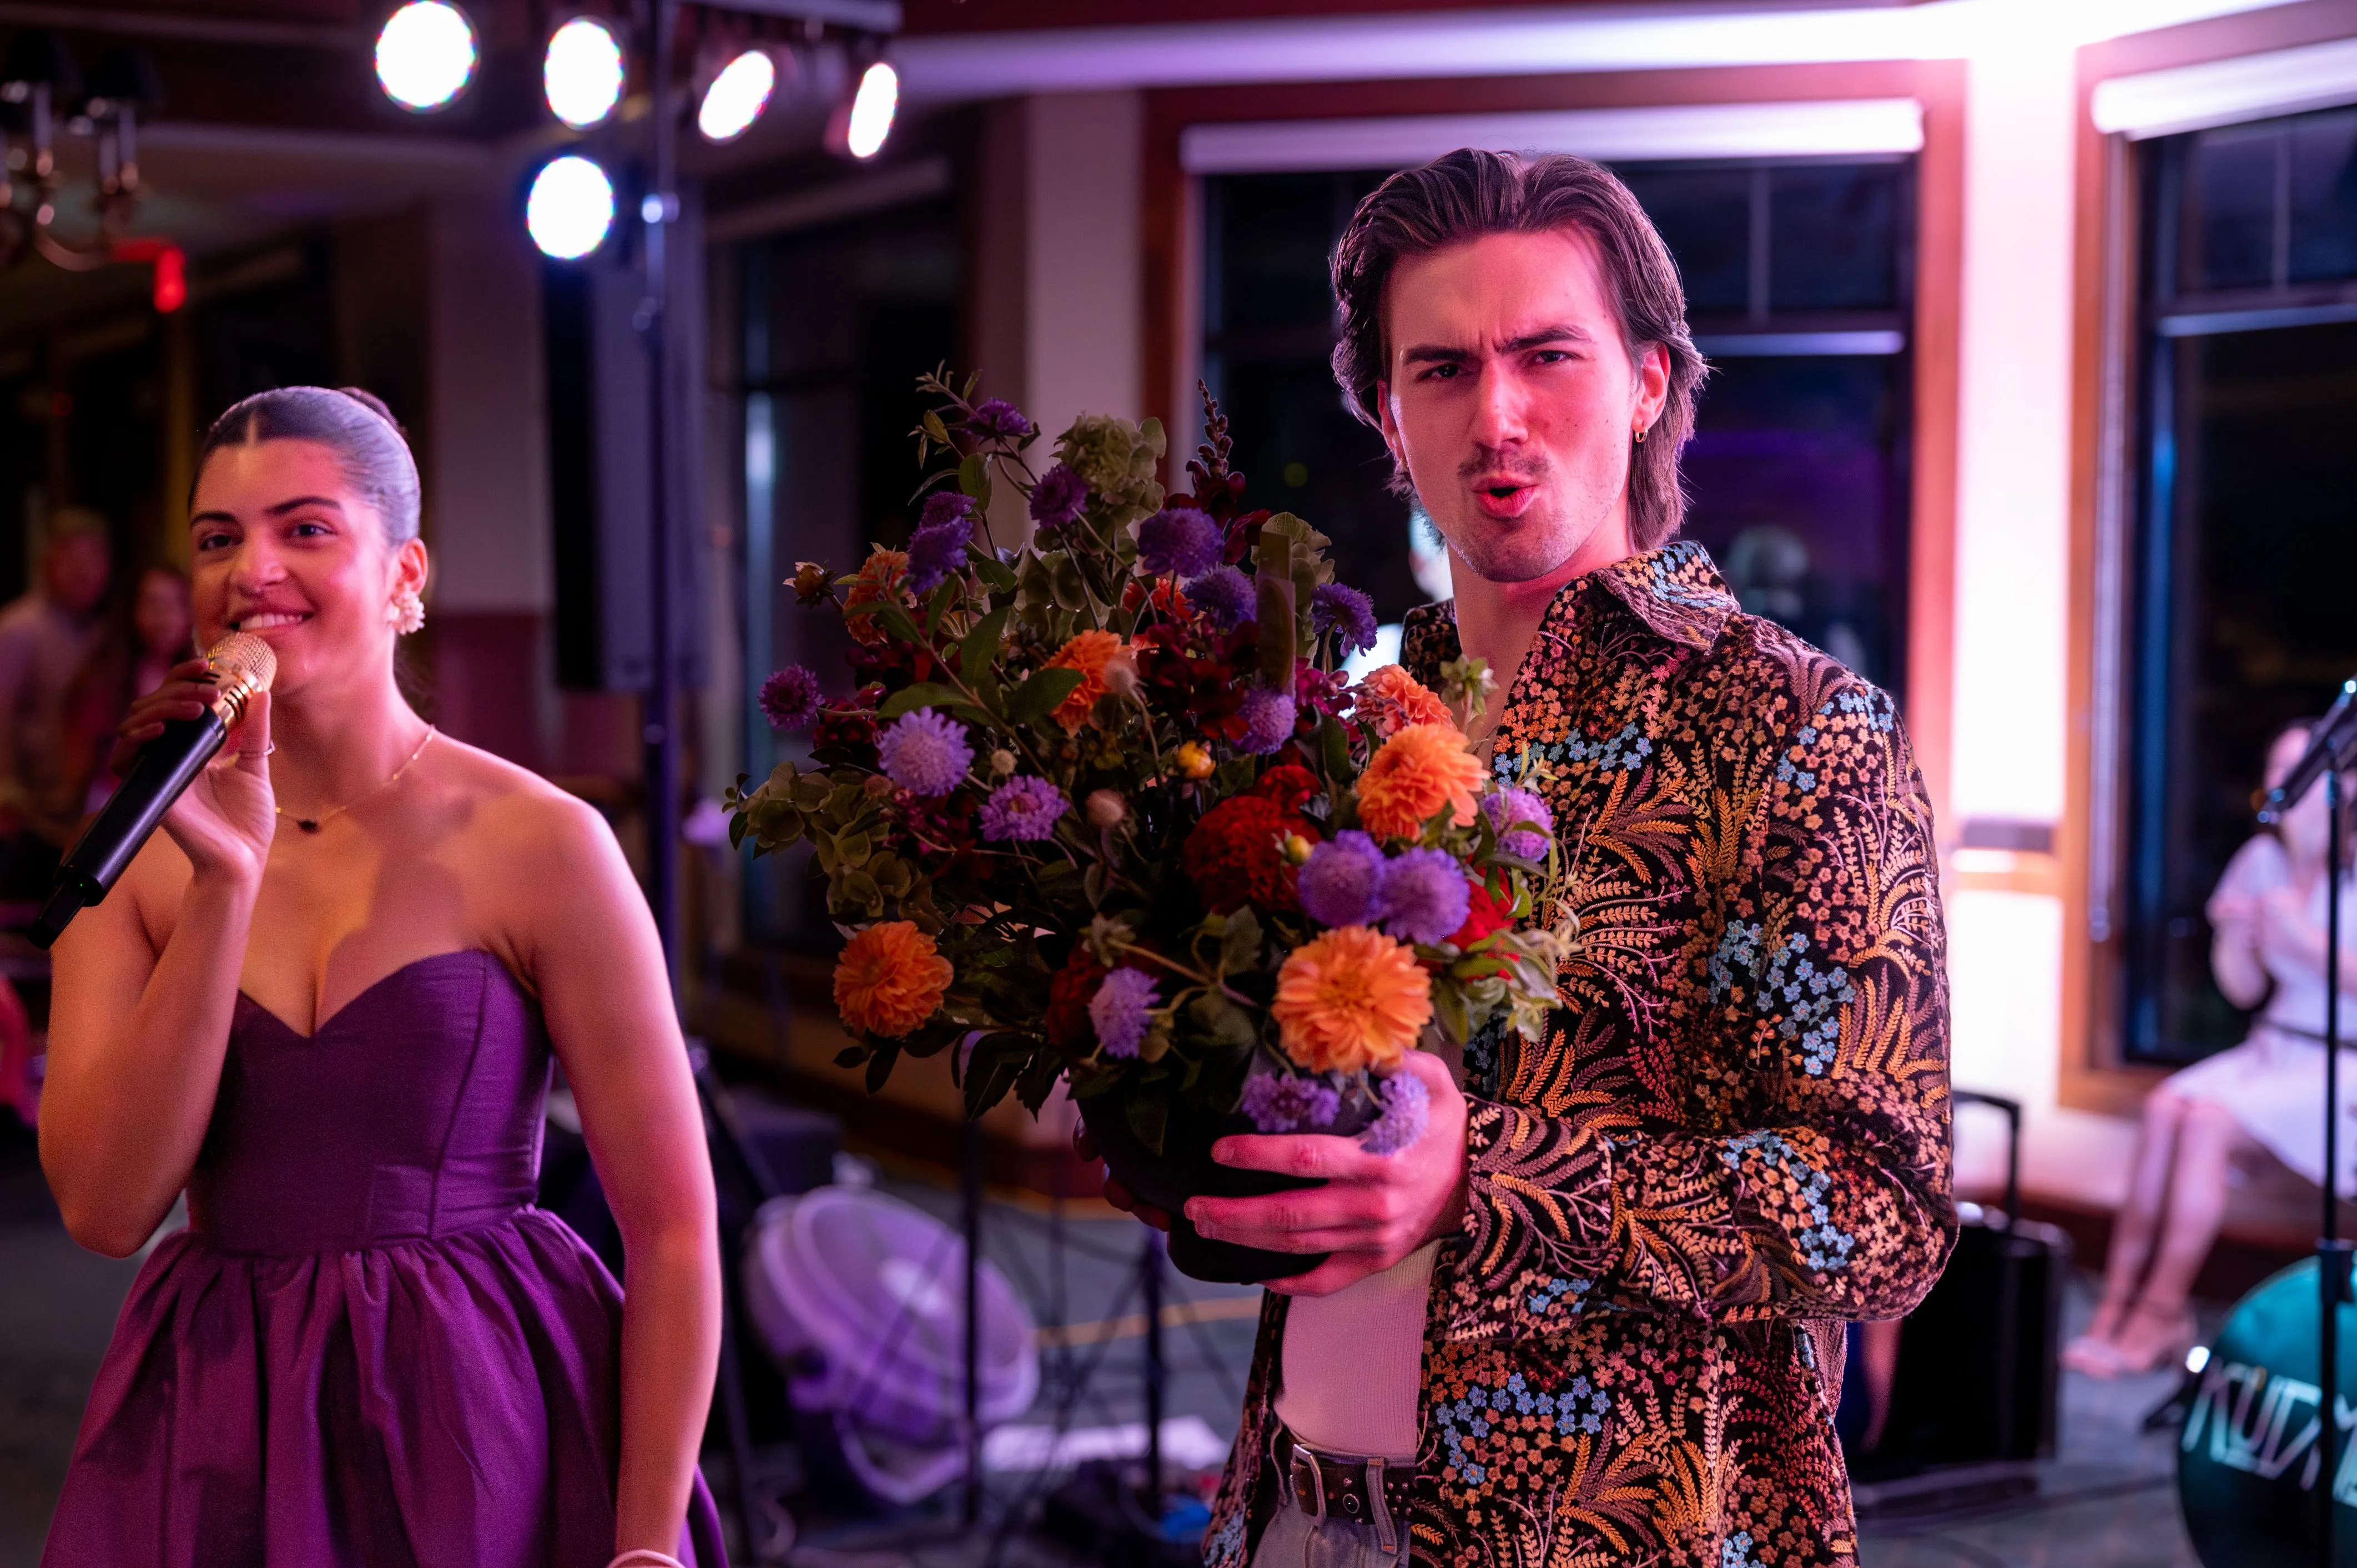 Two people at a party, a woman in a purple dress singing into a microphone and a man in a patterned shirt holding a bouquet of flowers with a playful expression.